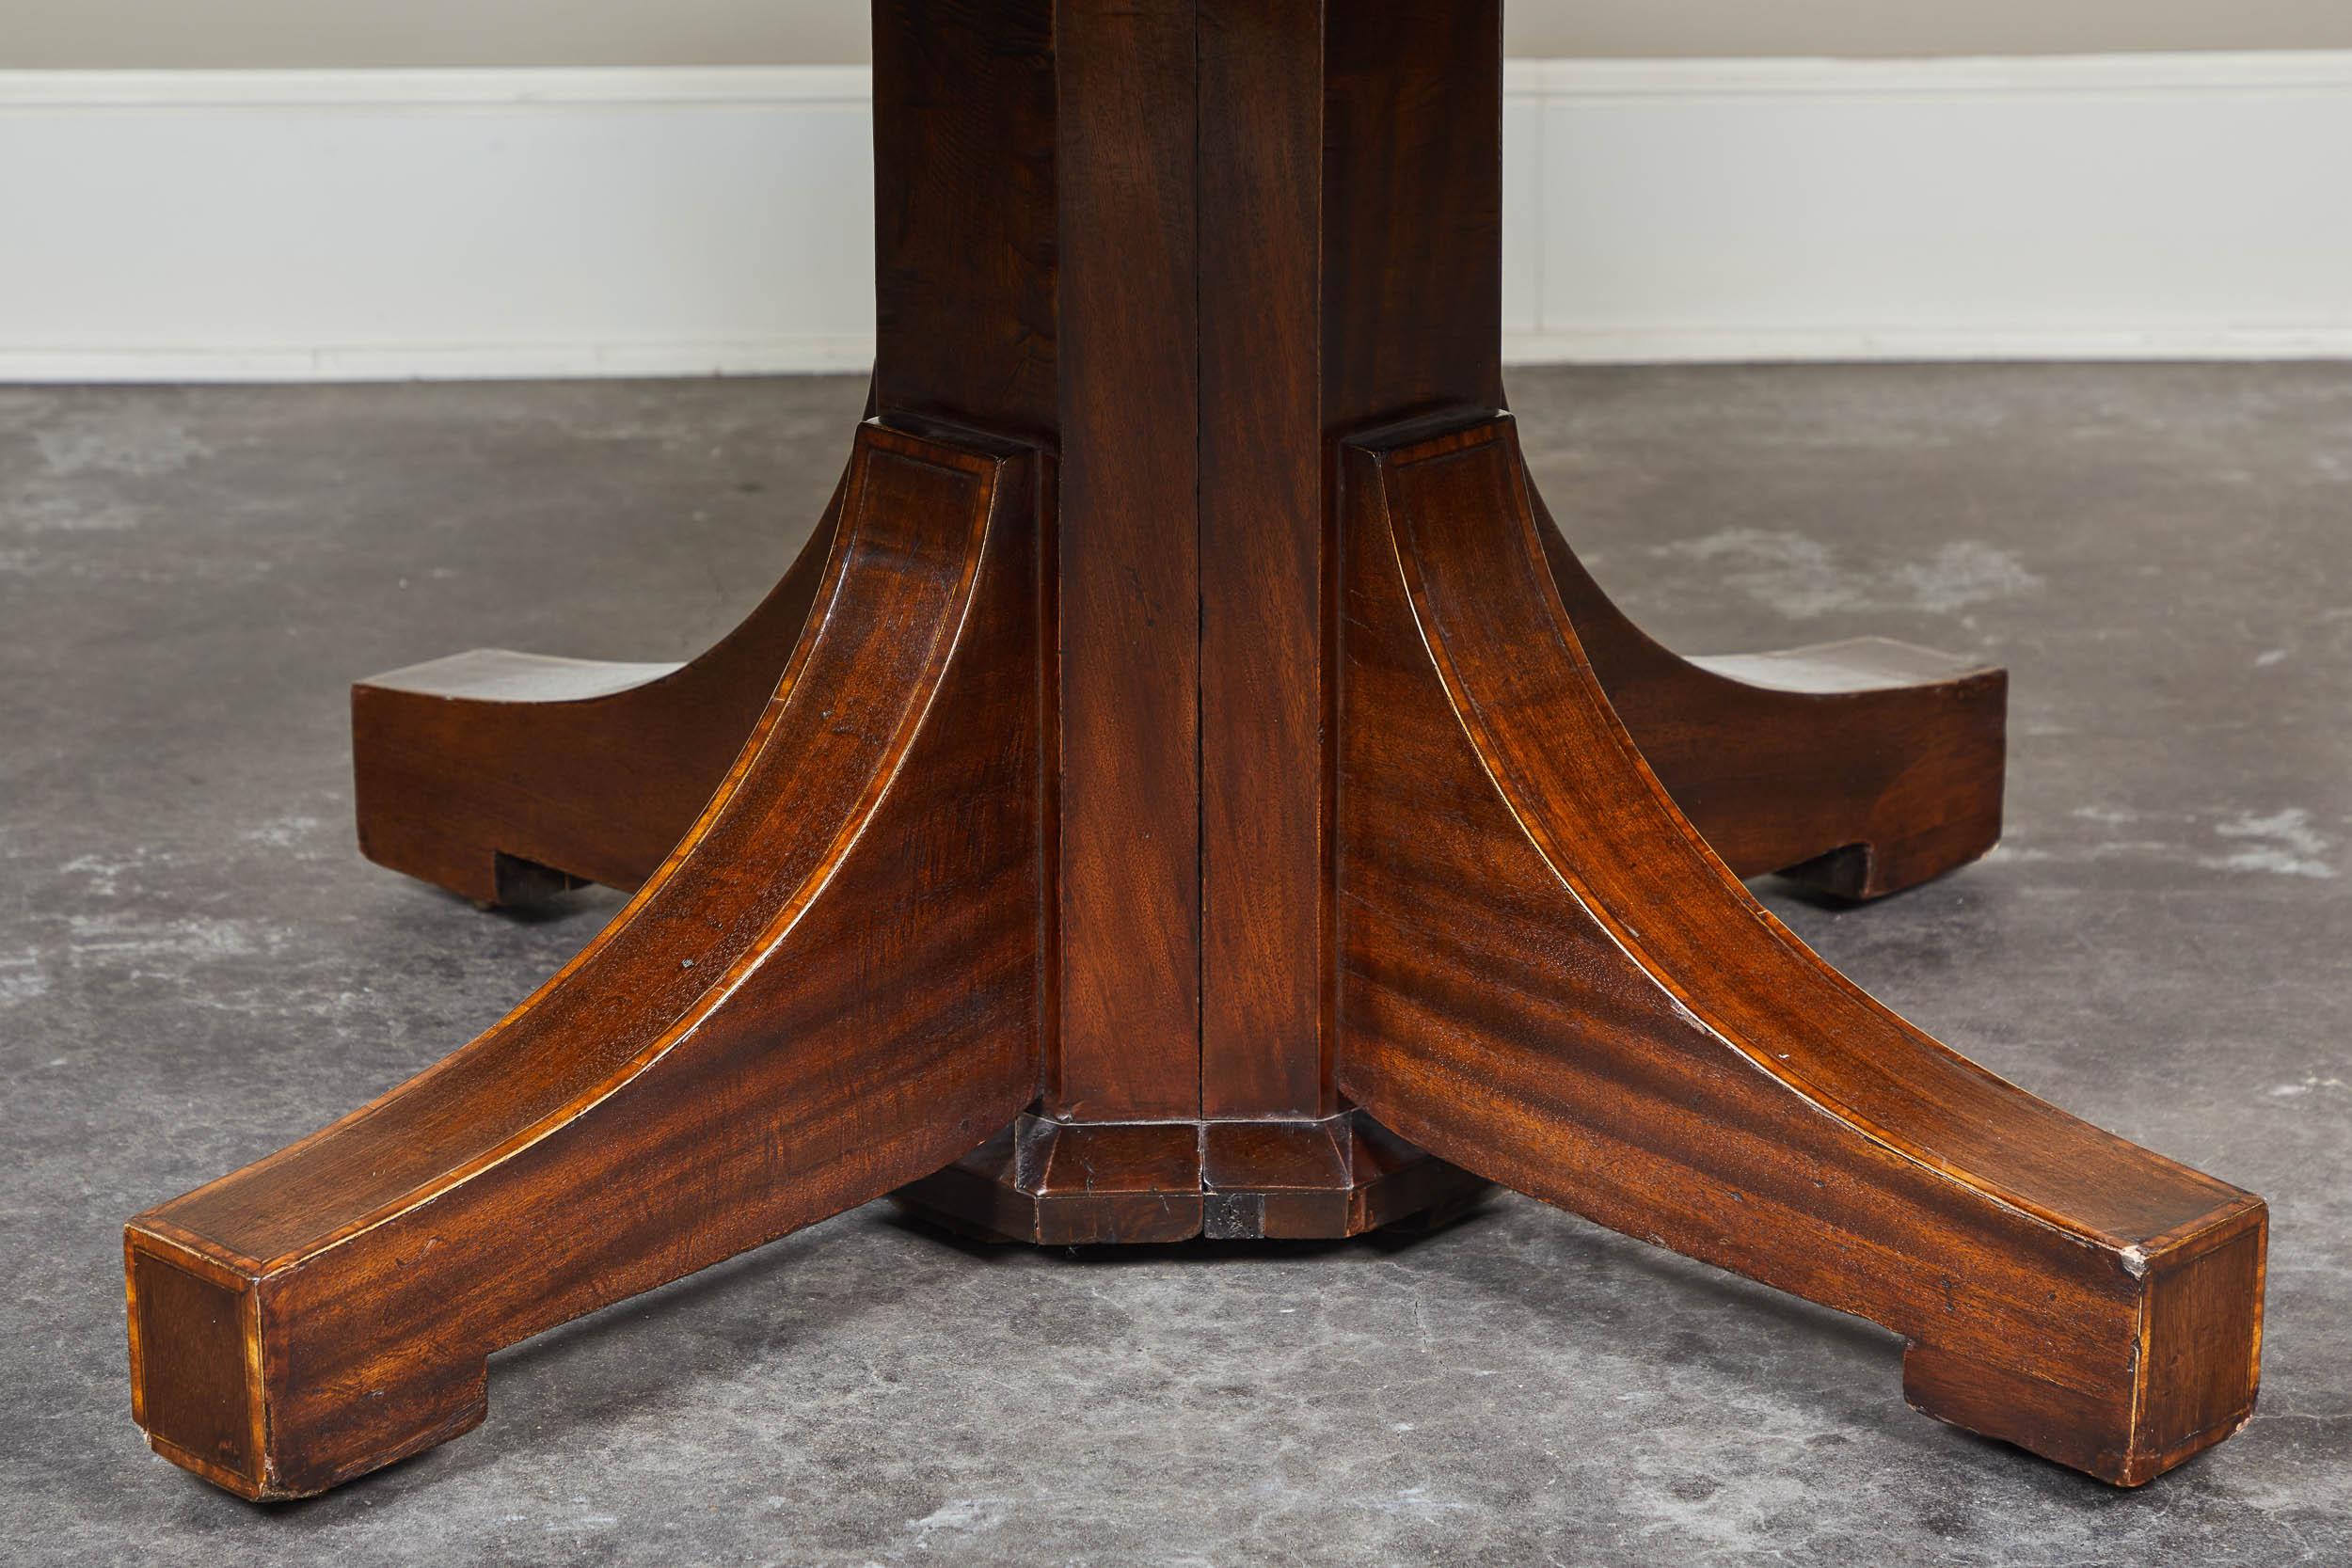 A 19th century English mahogany pedestal table. Features two leaves and an inlaid banding on top and legs. Simple, clean design while still allowing for extended seating with a leaf. Could easily fit into most breakfast nooks without the leaf,